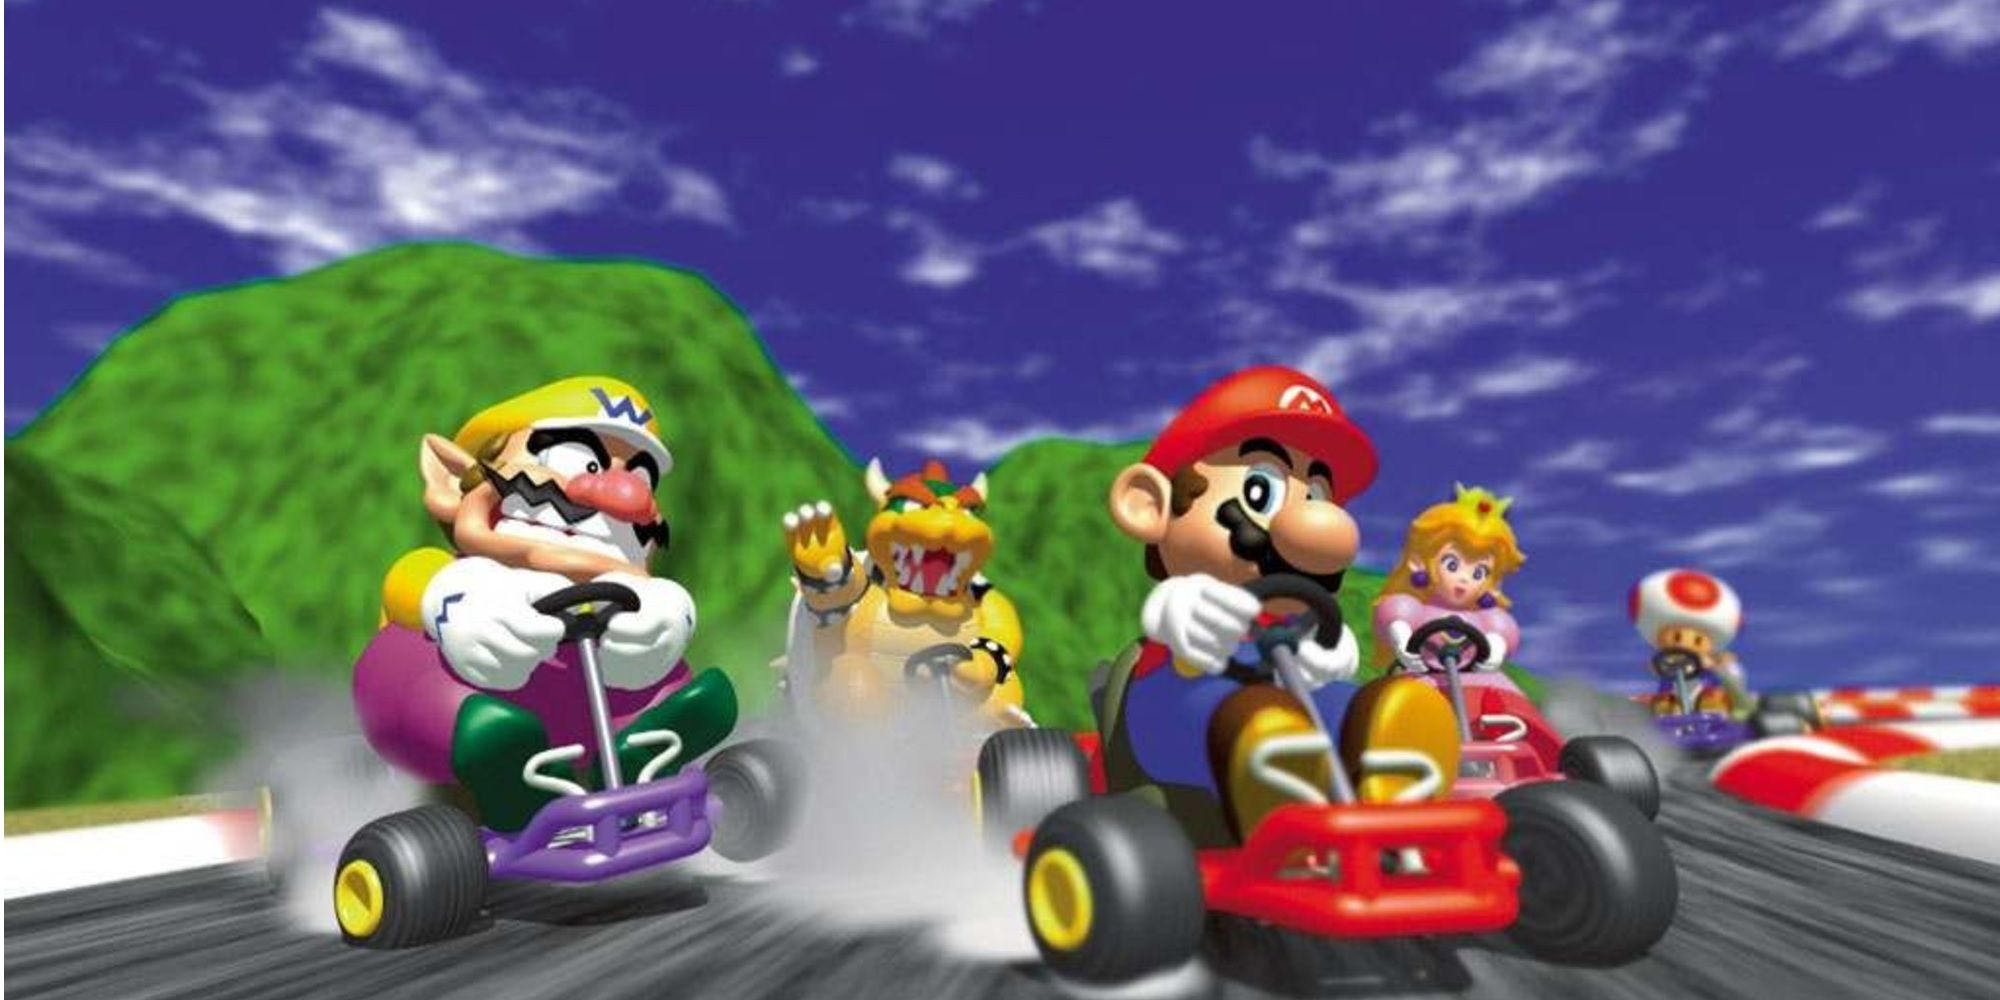 Mario Kart 64 Retro Games Online Discount Shop For Electronics Apparel Toys Books Games Computers Shoes Jewelry Watches Baby Products Sports Outdoors Office Products Bed Bath Furniture Tools Hardware